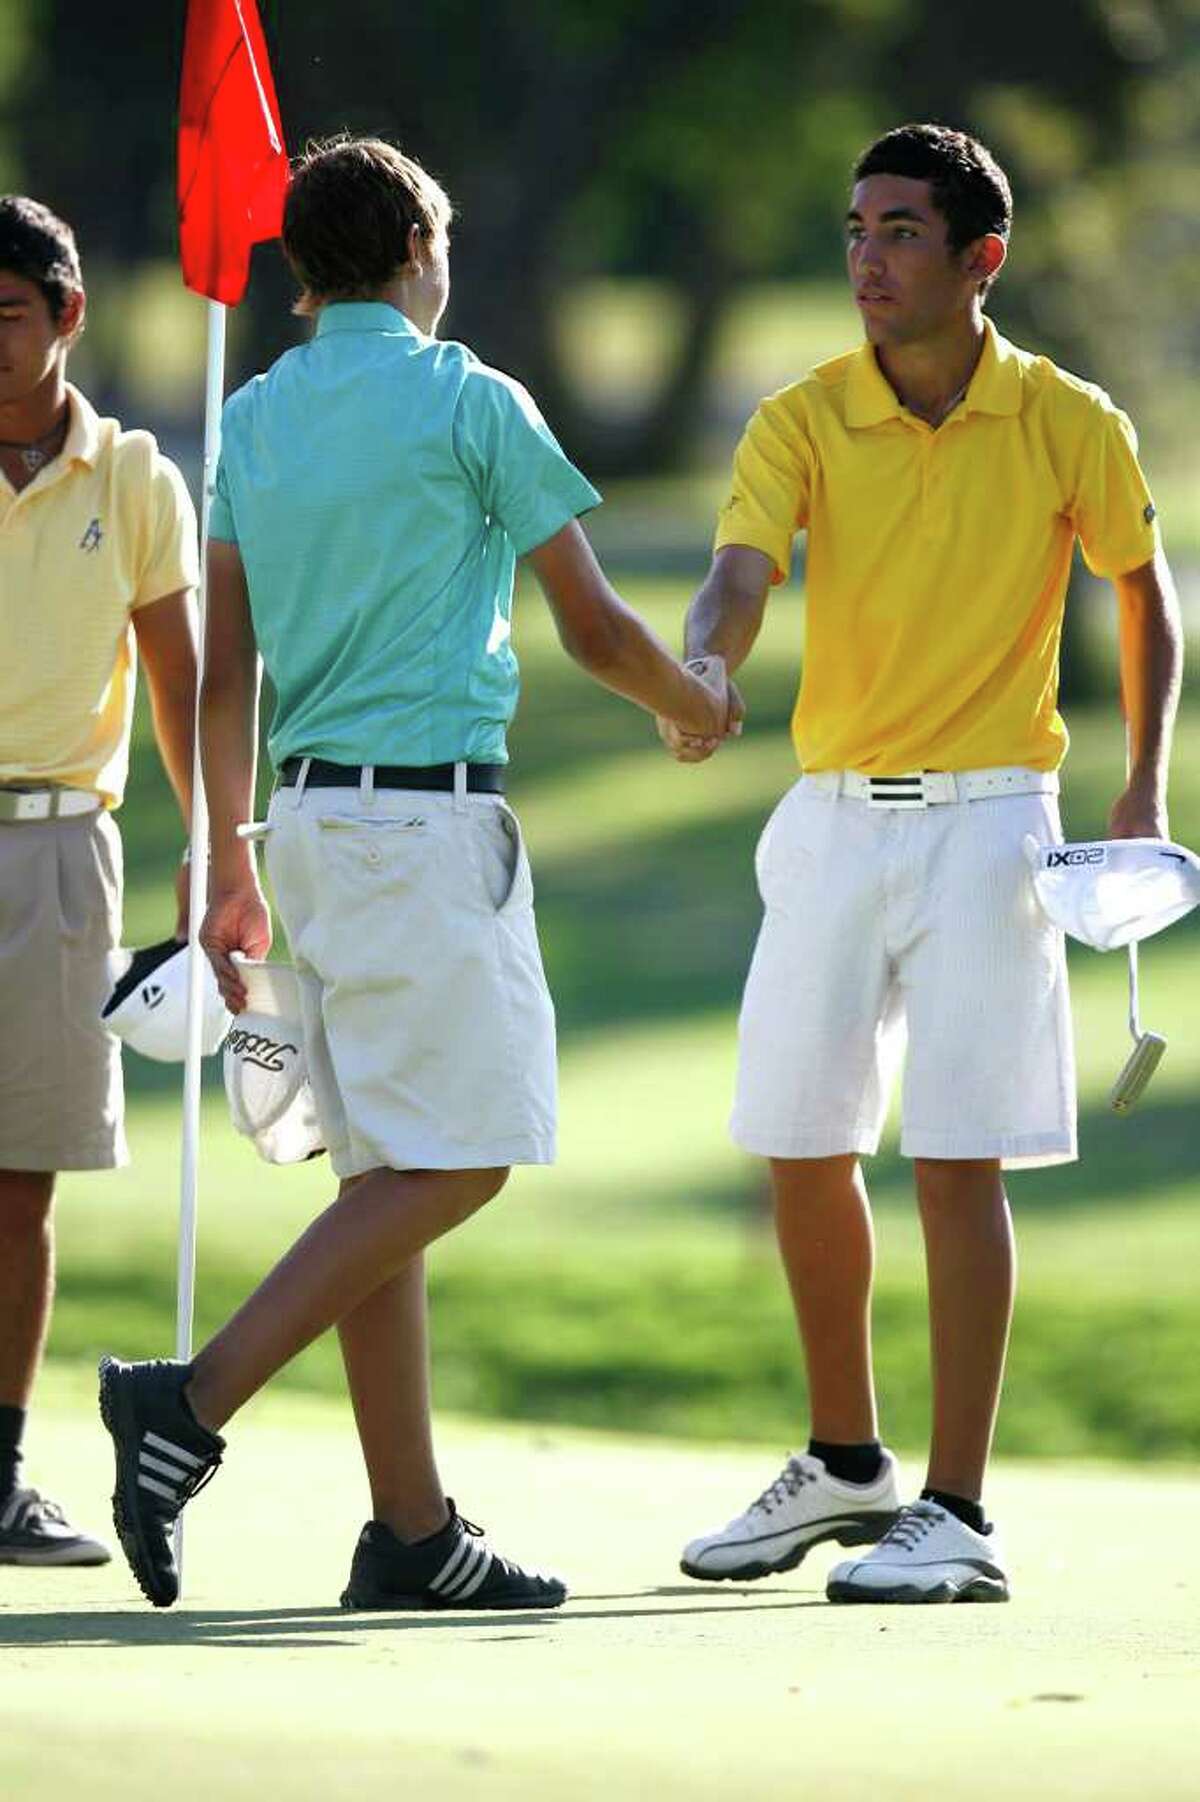 Chris Schriedel, who placed second, congratulates boys champion Alex Bissaro after the Greater San Antonio Junior Championship at Brackenridge Golf Course on Thursday, July 28, 2011. Bissaro gained the title after losing on the final hole last year.